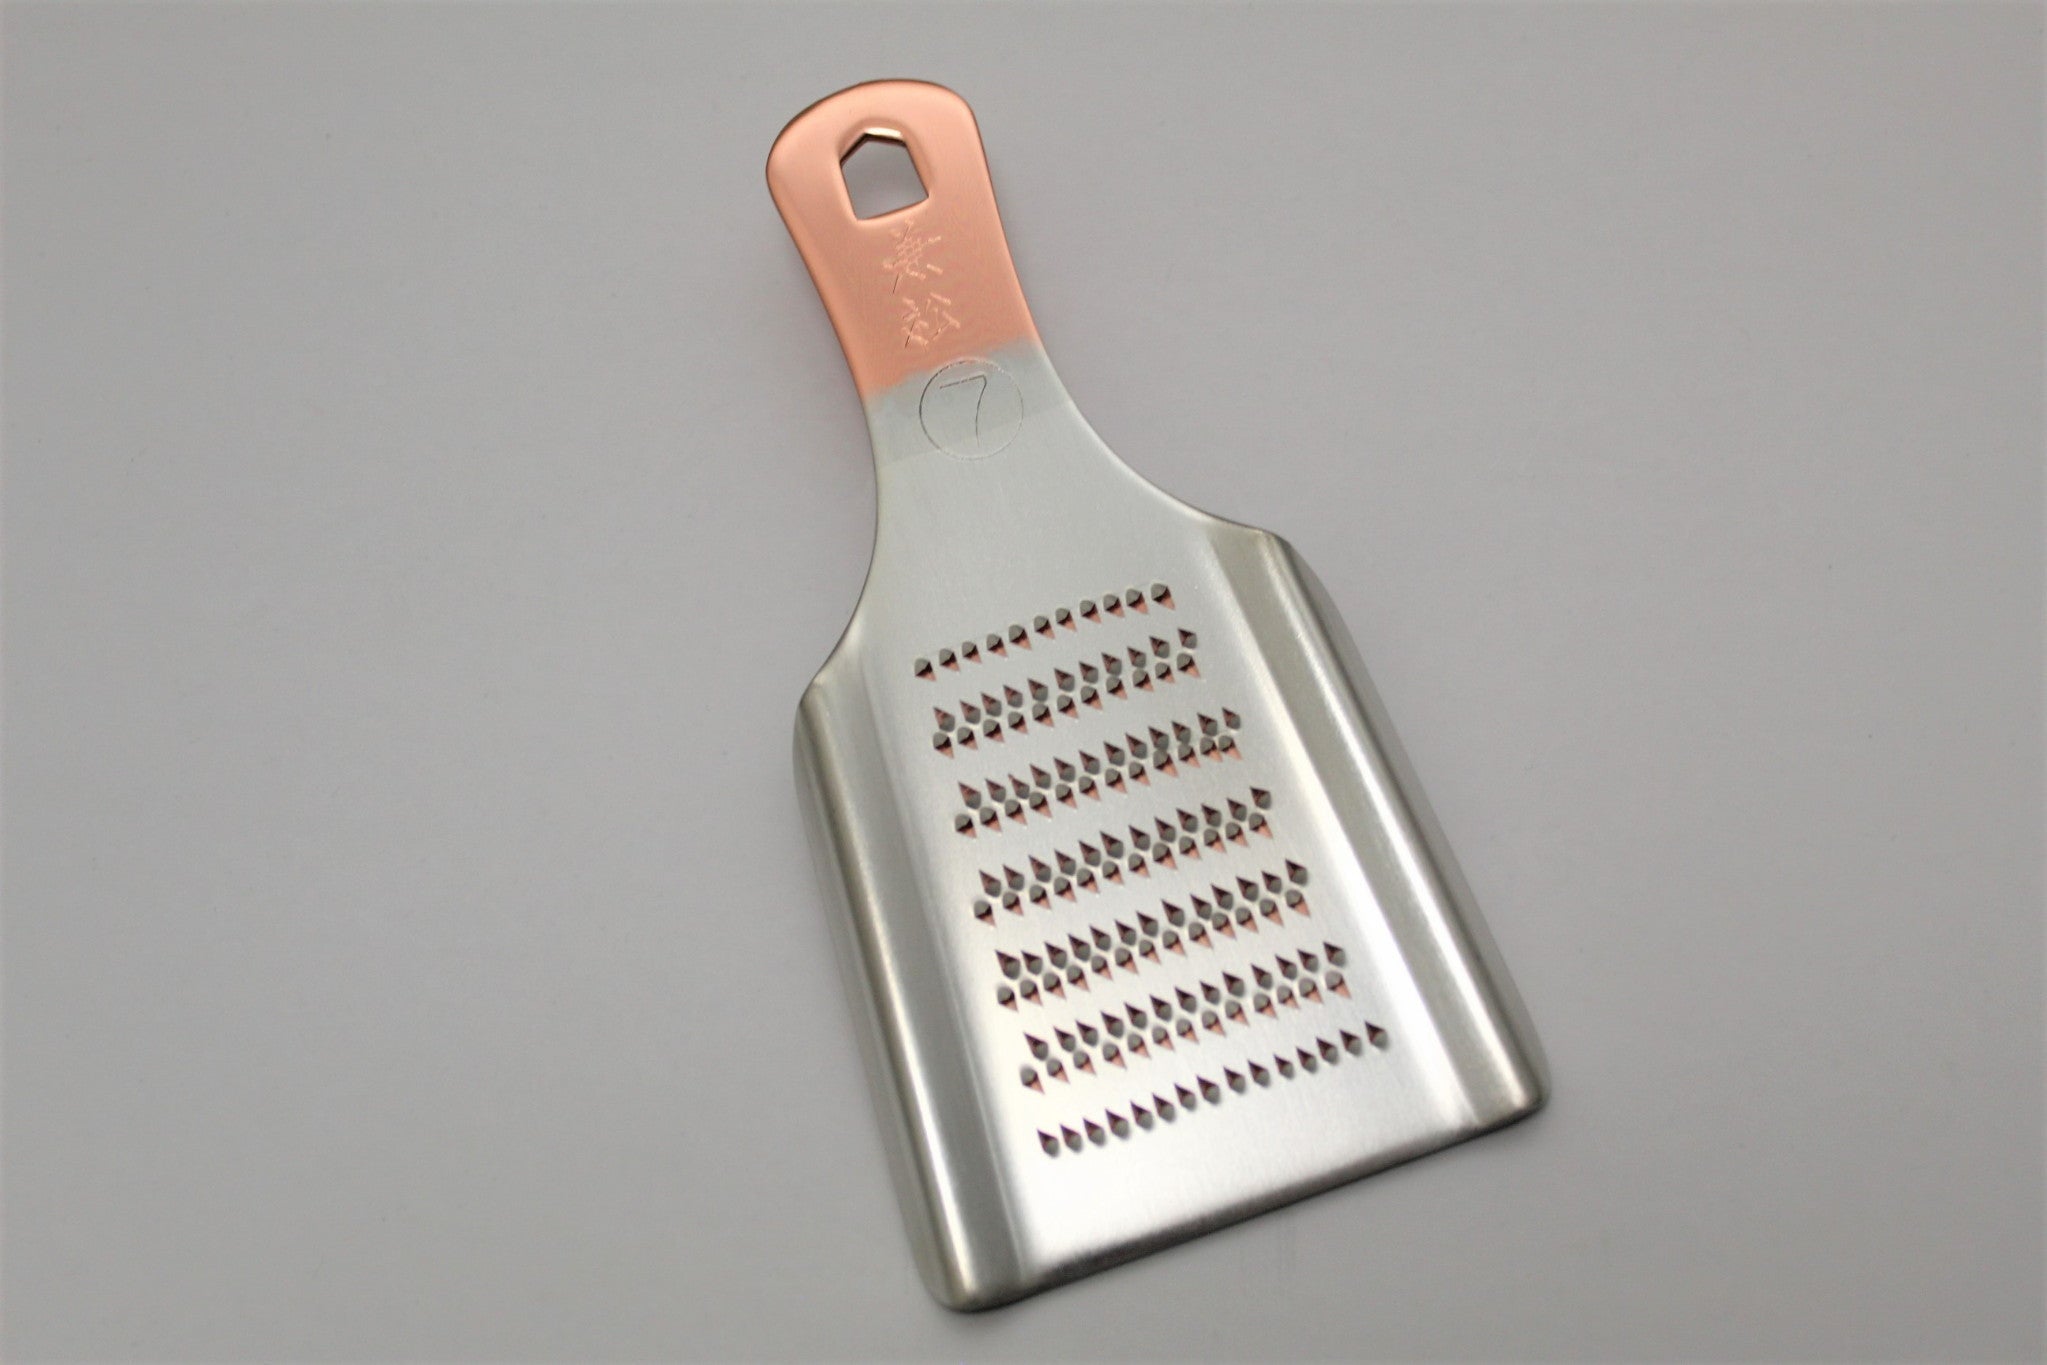 Ooya Seisakusho Copper Grater – TENZO